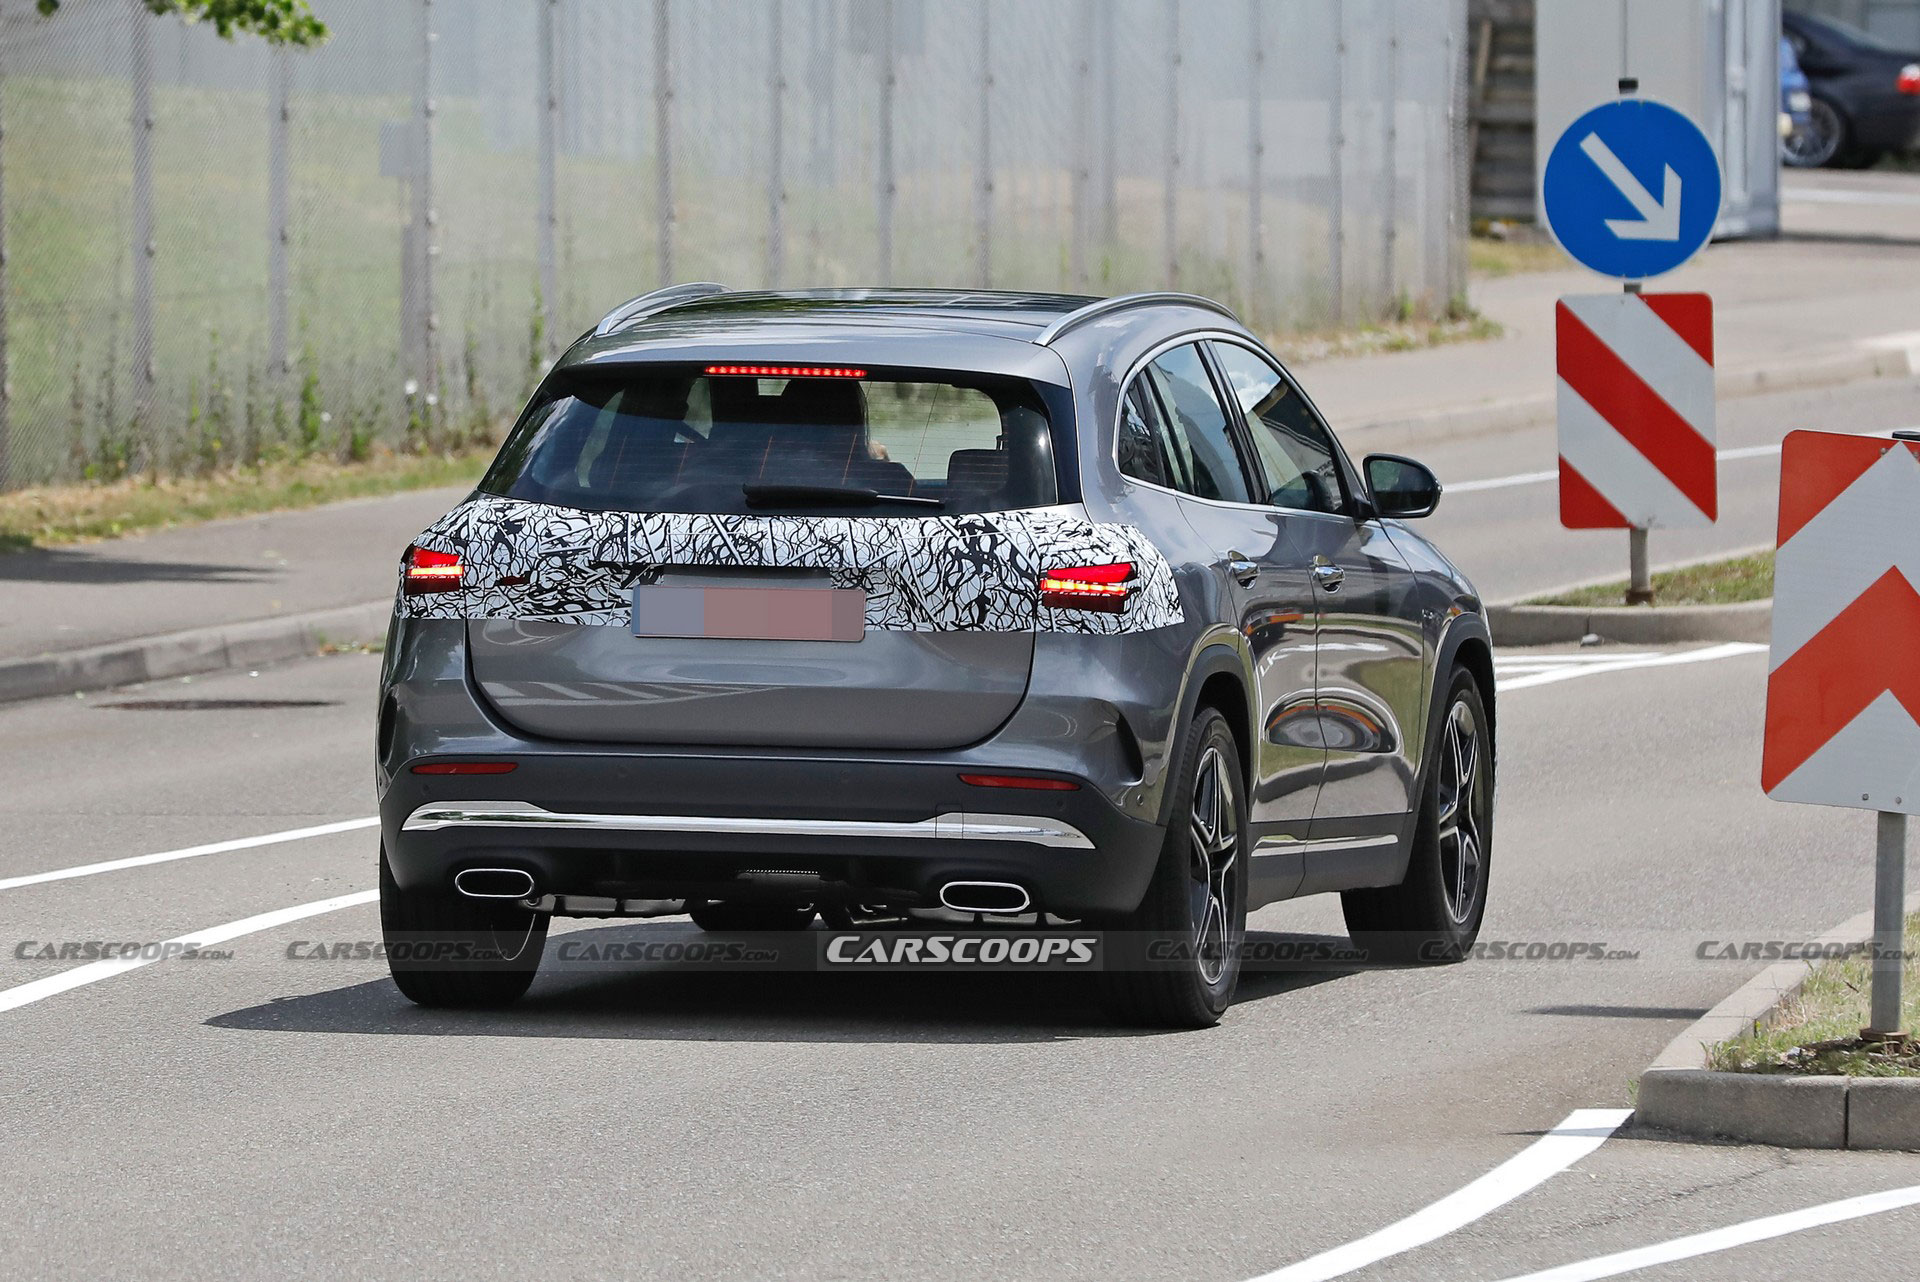 The updated Mercedes GLA has been tested with minor upgrades